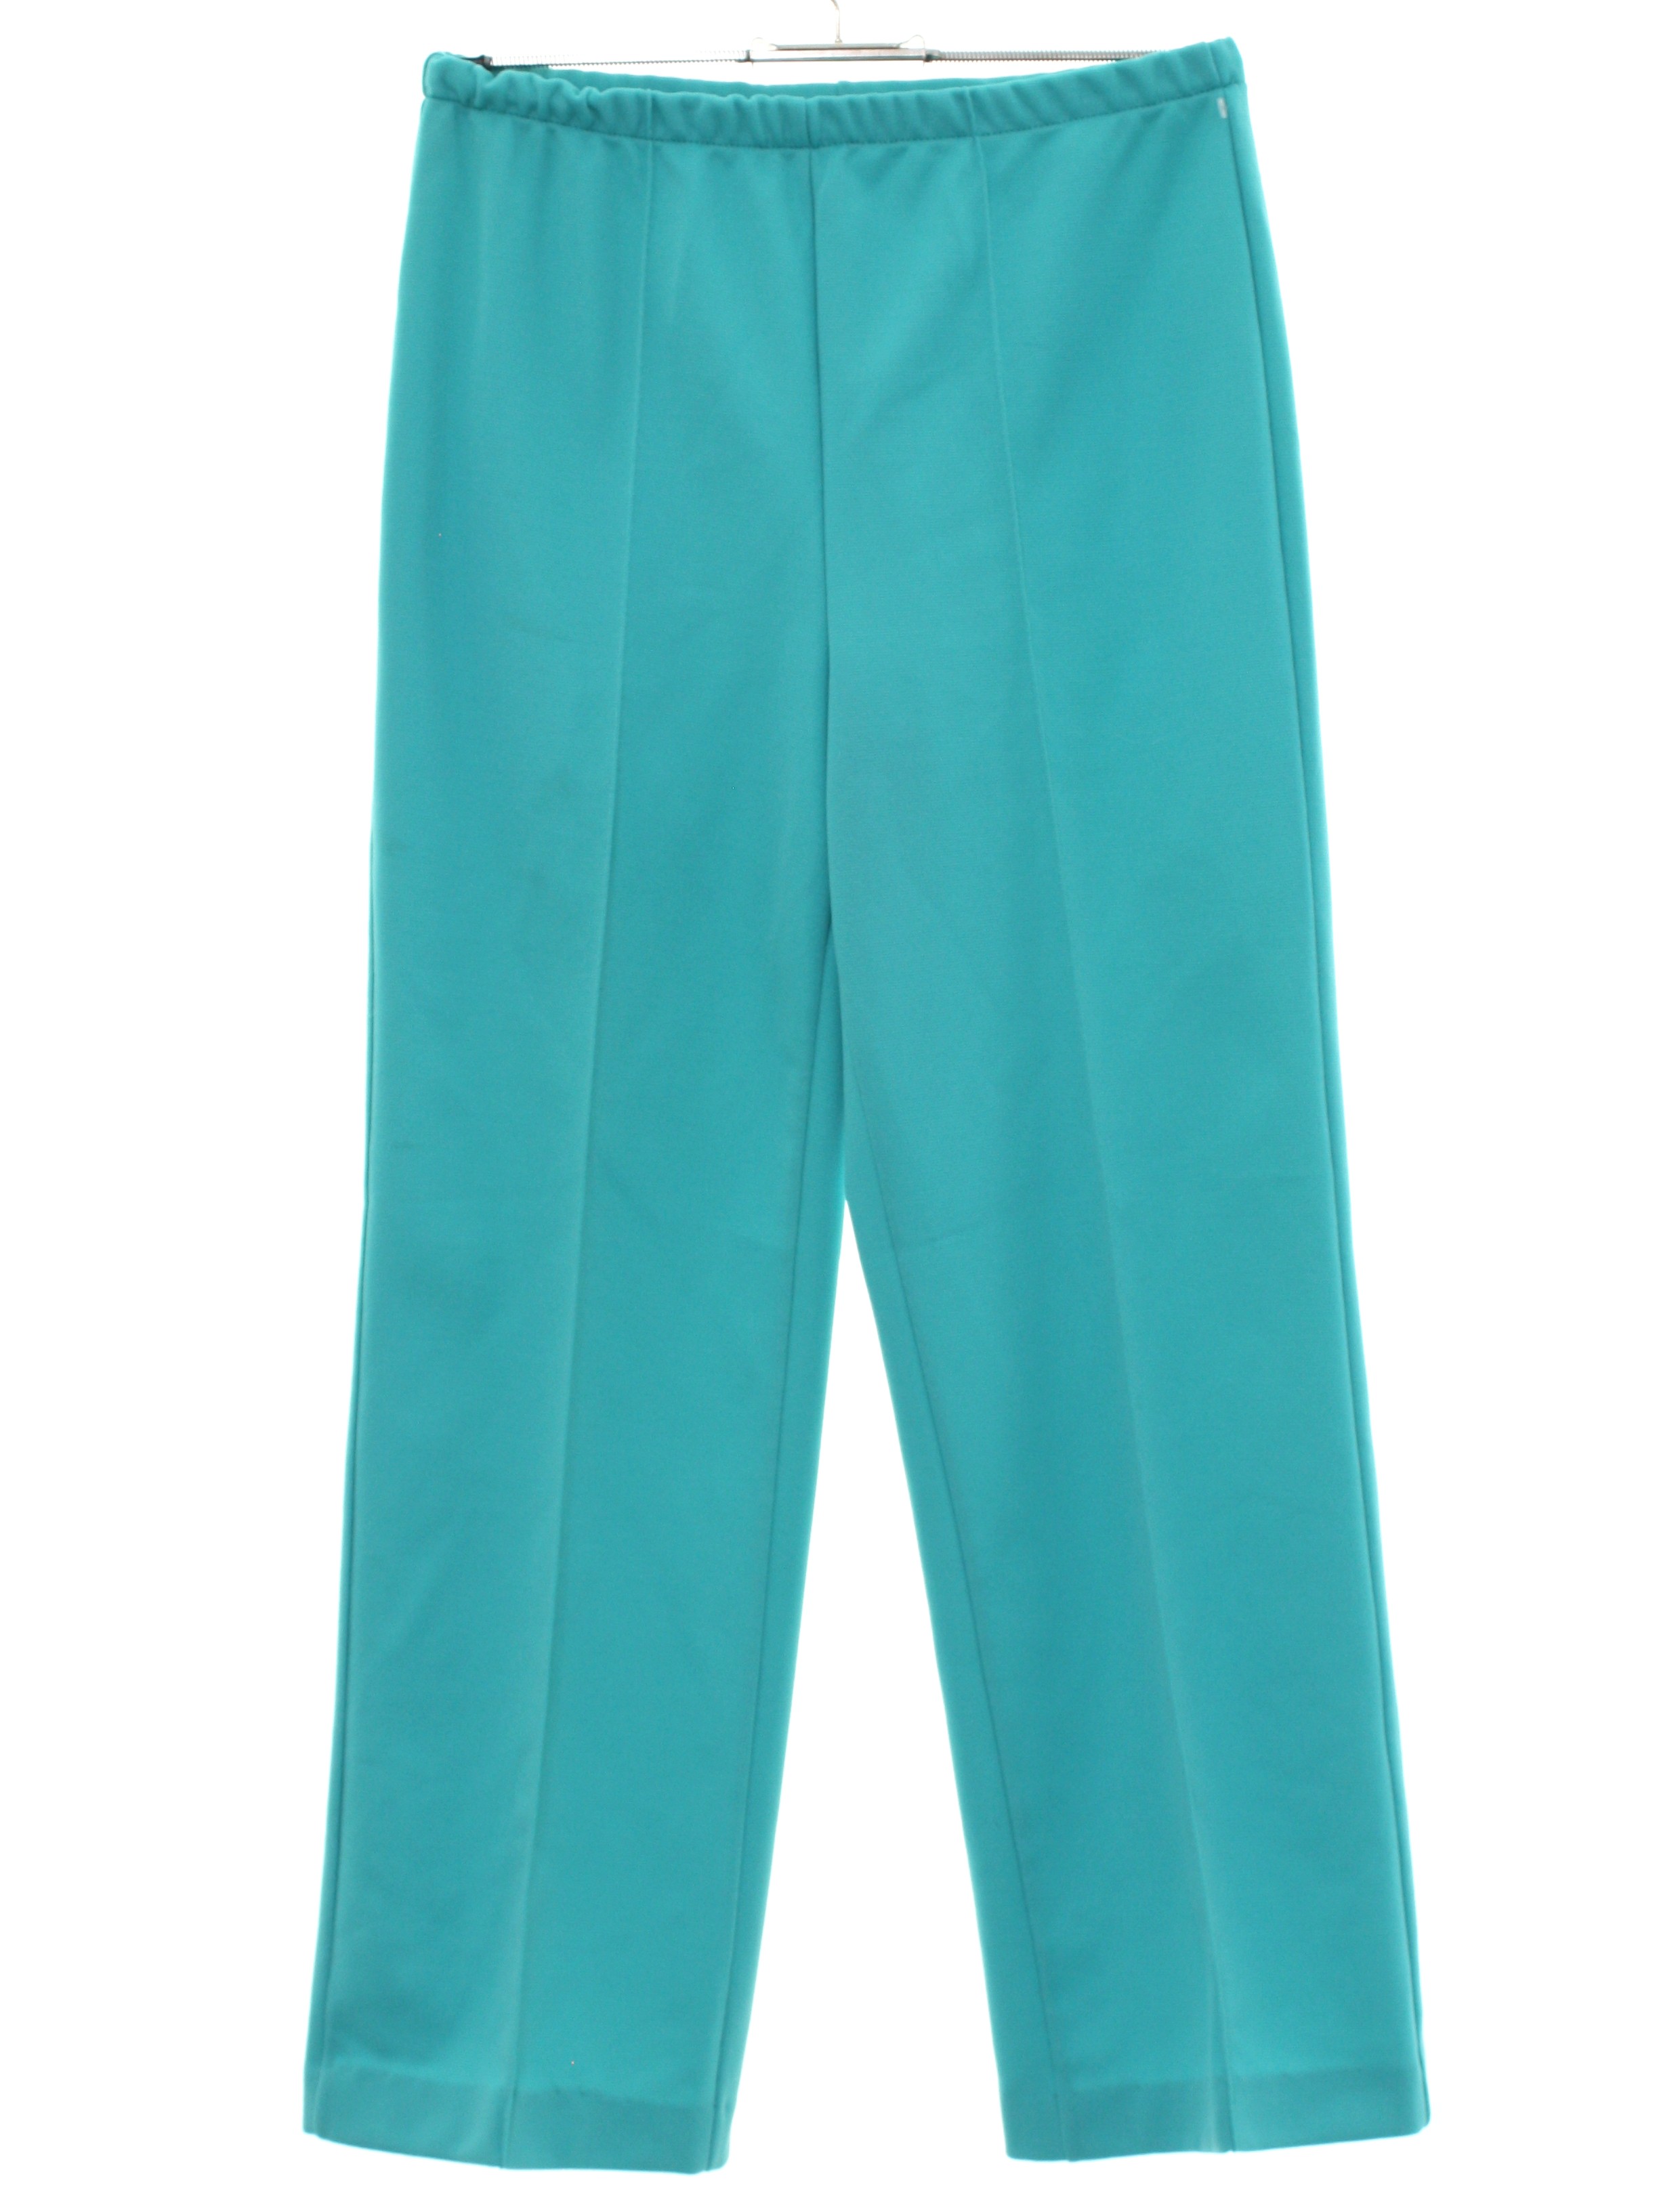 1970's Pants (Sears): 70s -Sears- Womens teal background polyester knit ...